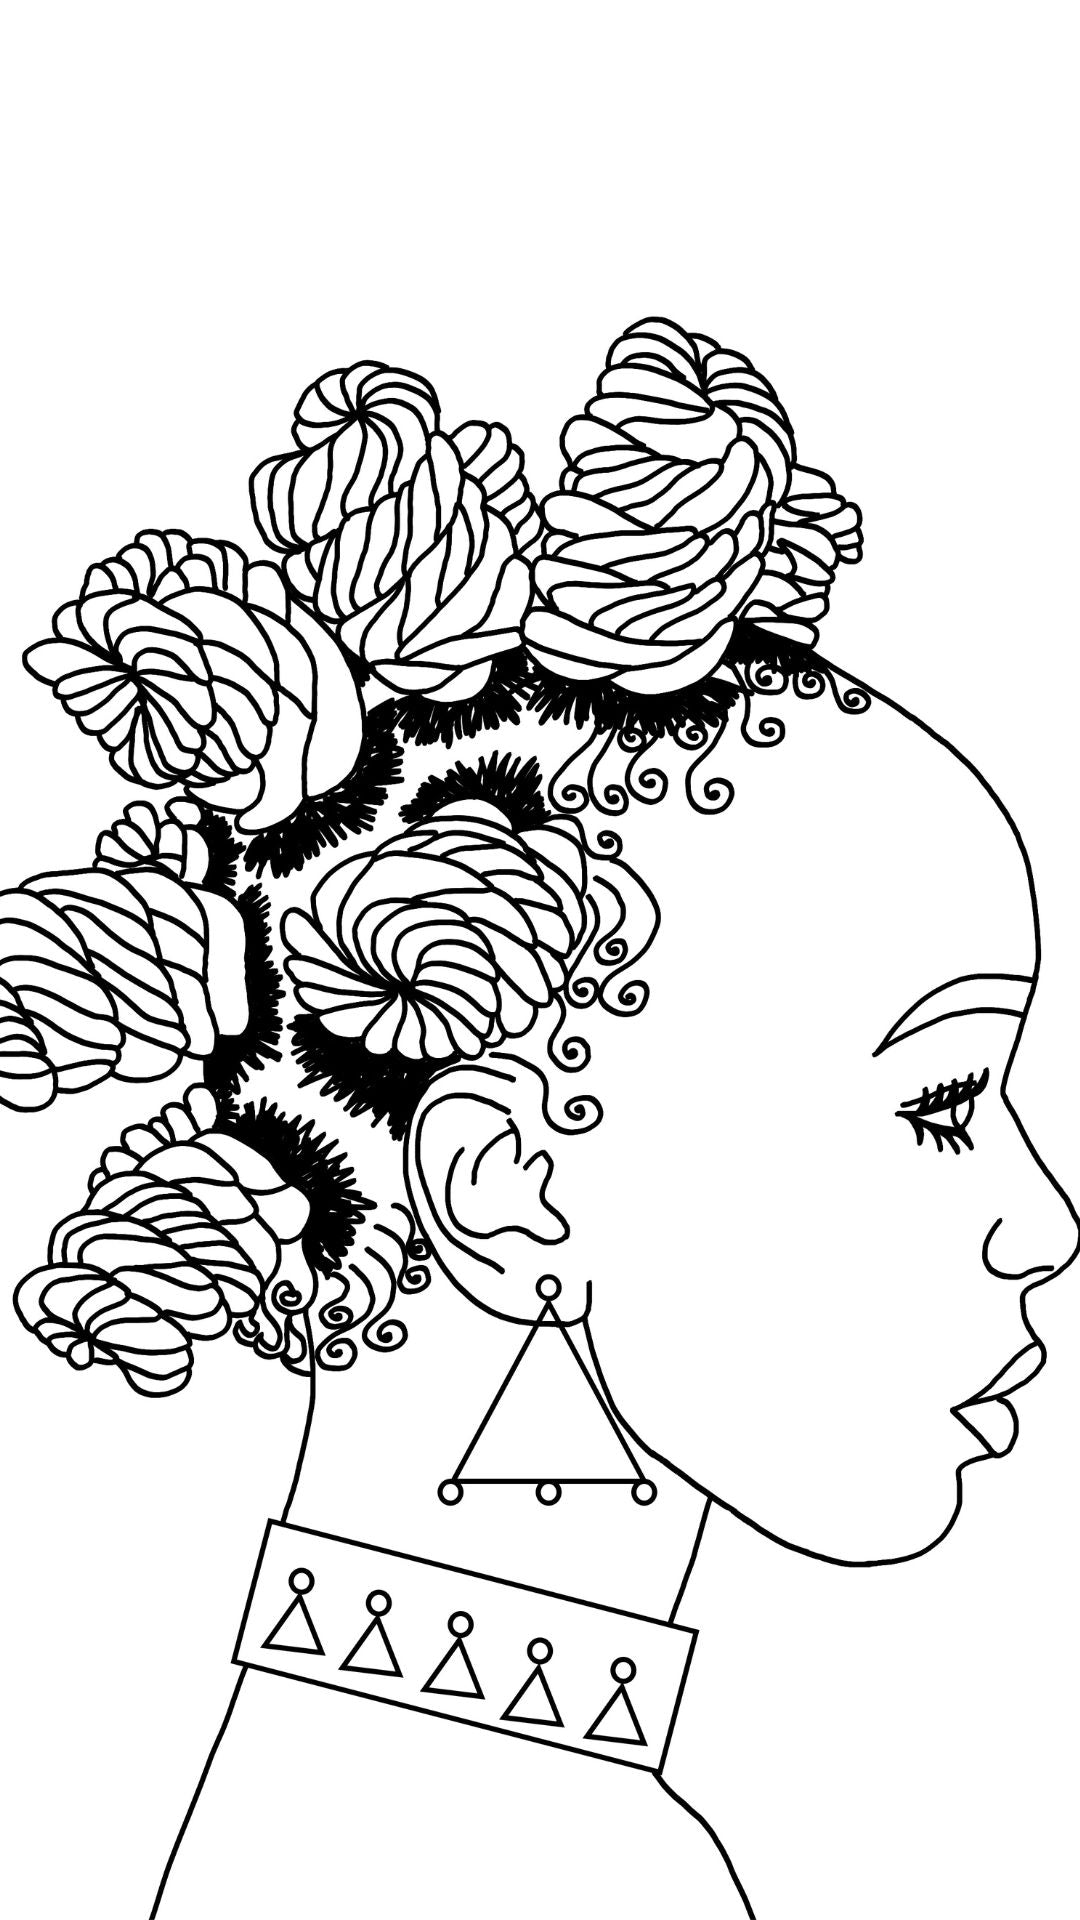 Afro Hair Colouring Book